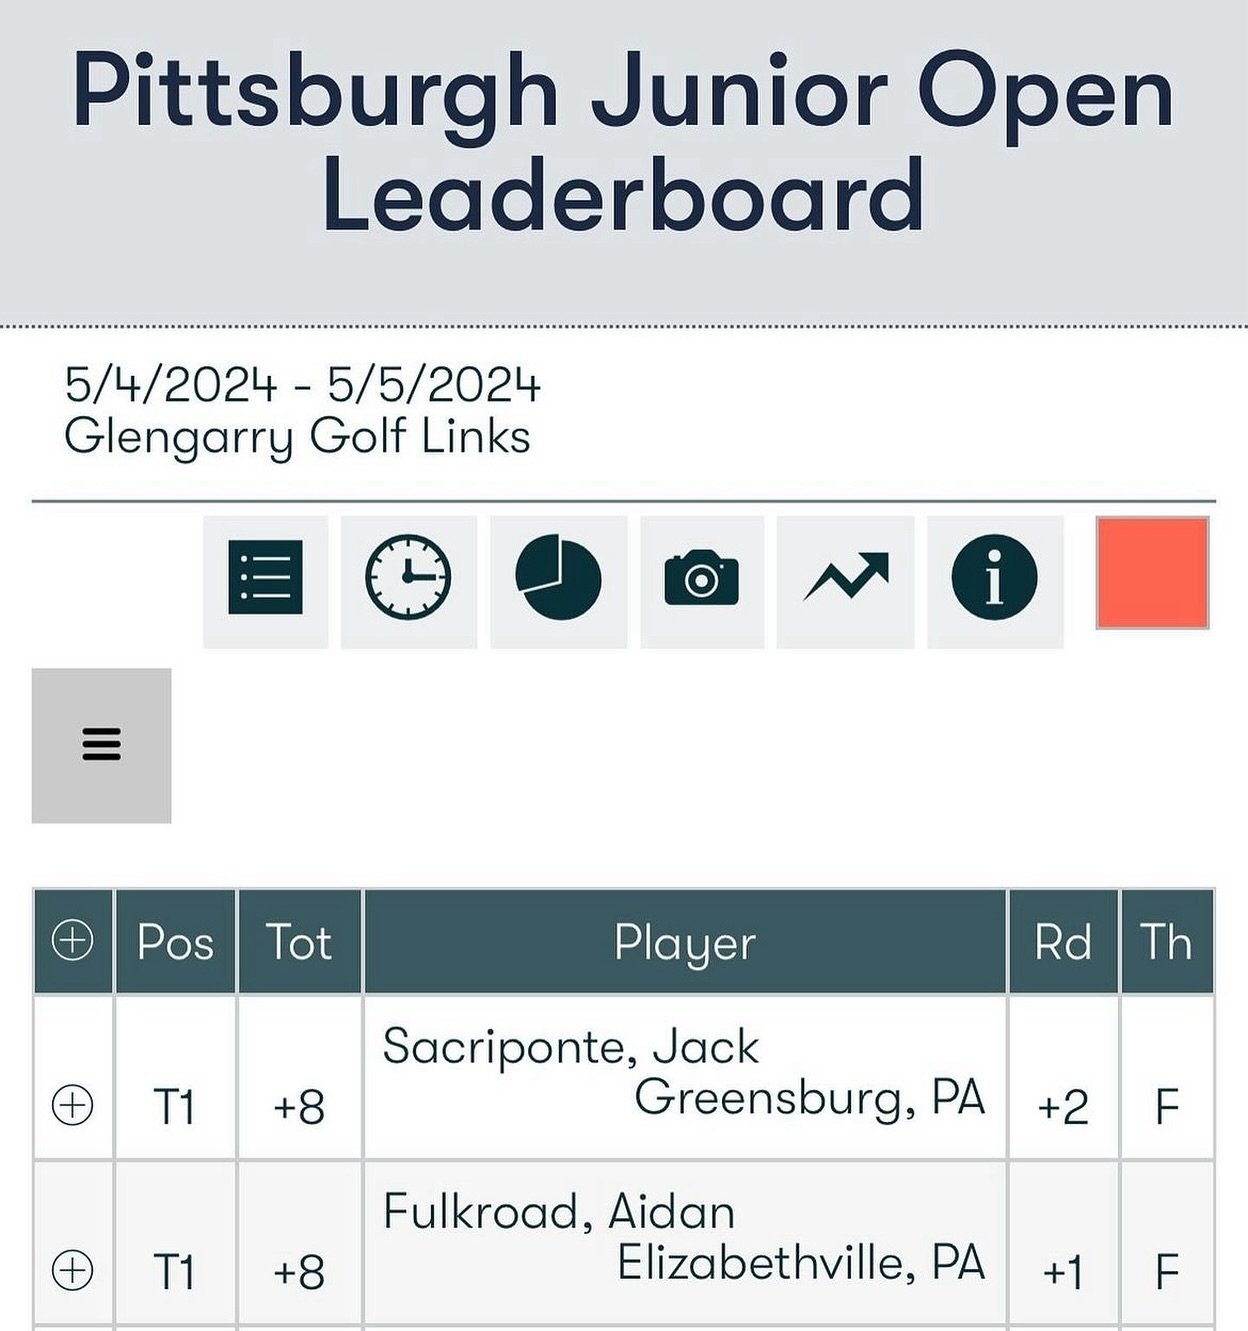 Congratulations to @aidan.fulkroad on coming in a T1 at the @hurricanejrgolf event in PA! More top finishes to come 🏆

#golf #juniorgolf #juniorgolfer #golfcoach #mentalperformance #mentalperformancecoach #inthegolfzone